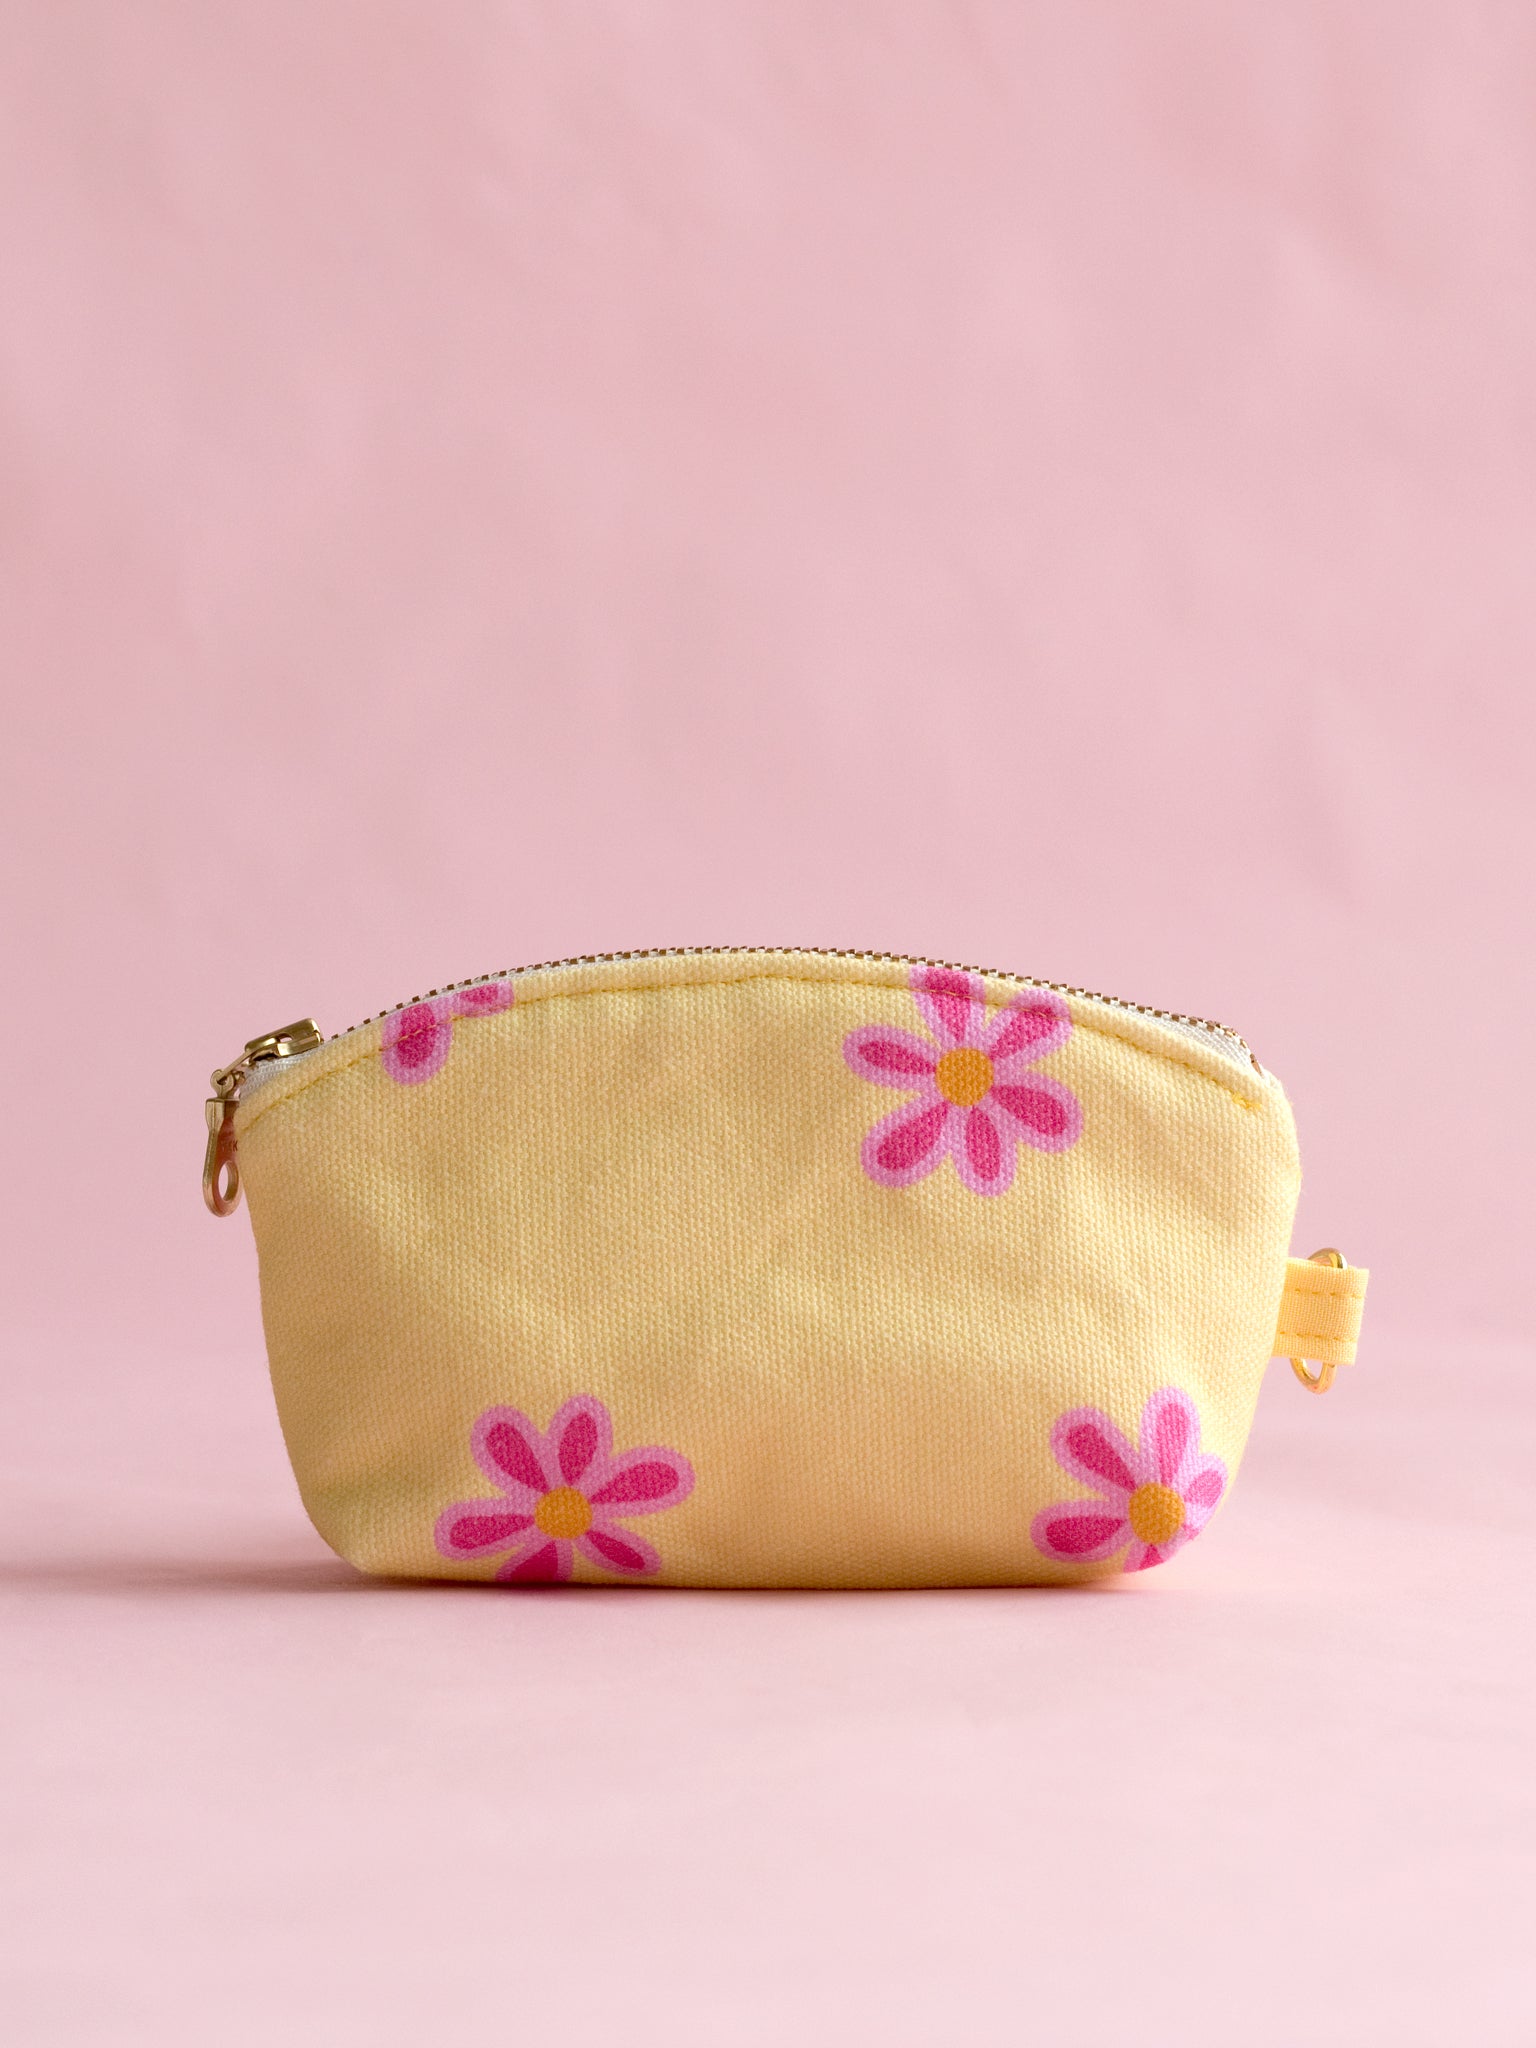 A yellow floral coin purse with a metal zip and ring hook on a pink foreground.